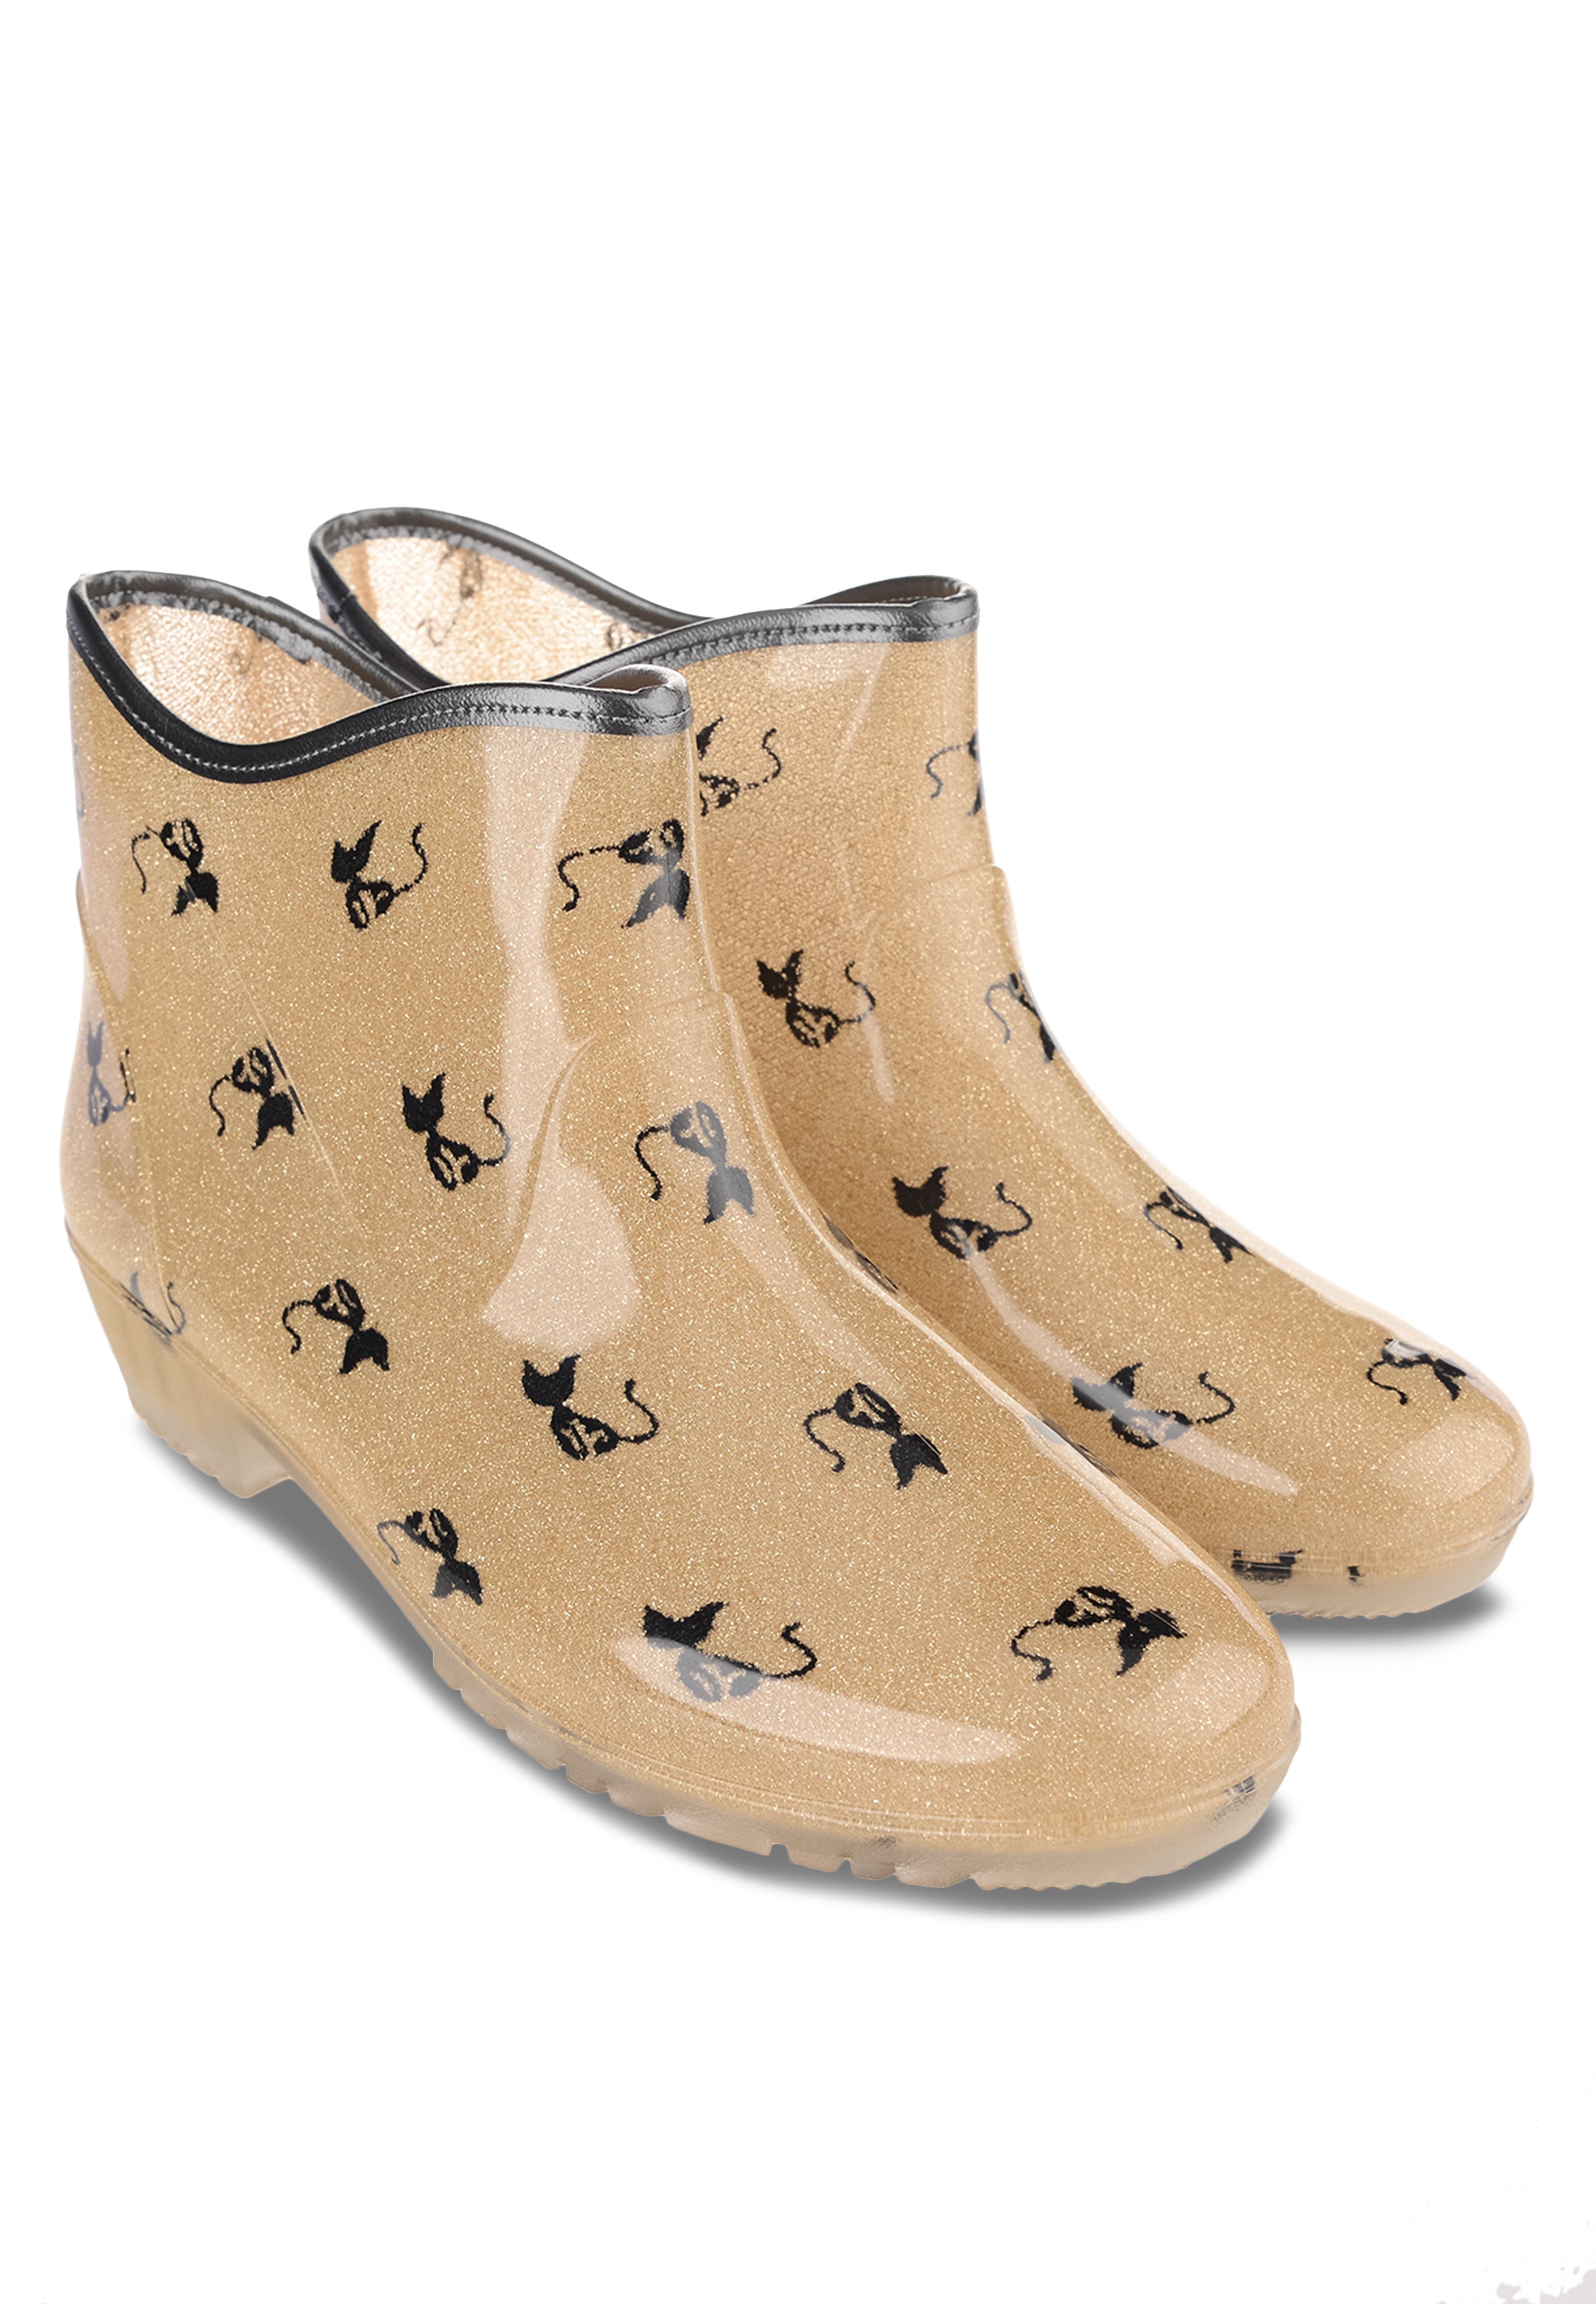 Cats Pattern Classic Lady Rain Boots with Heels